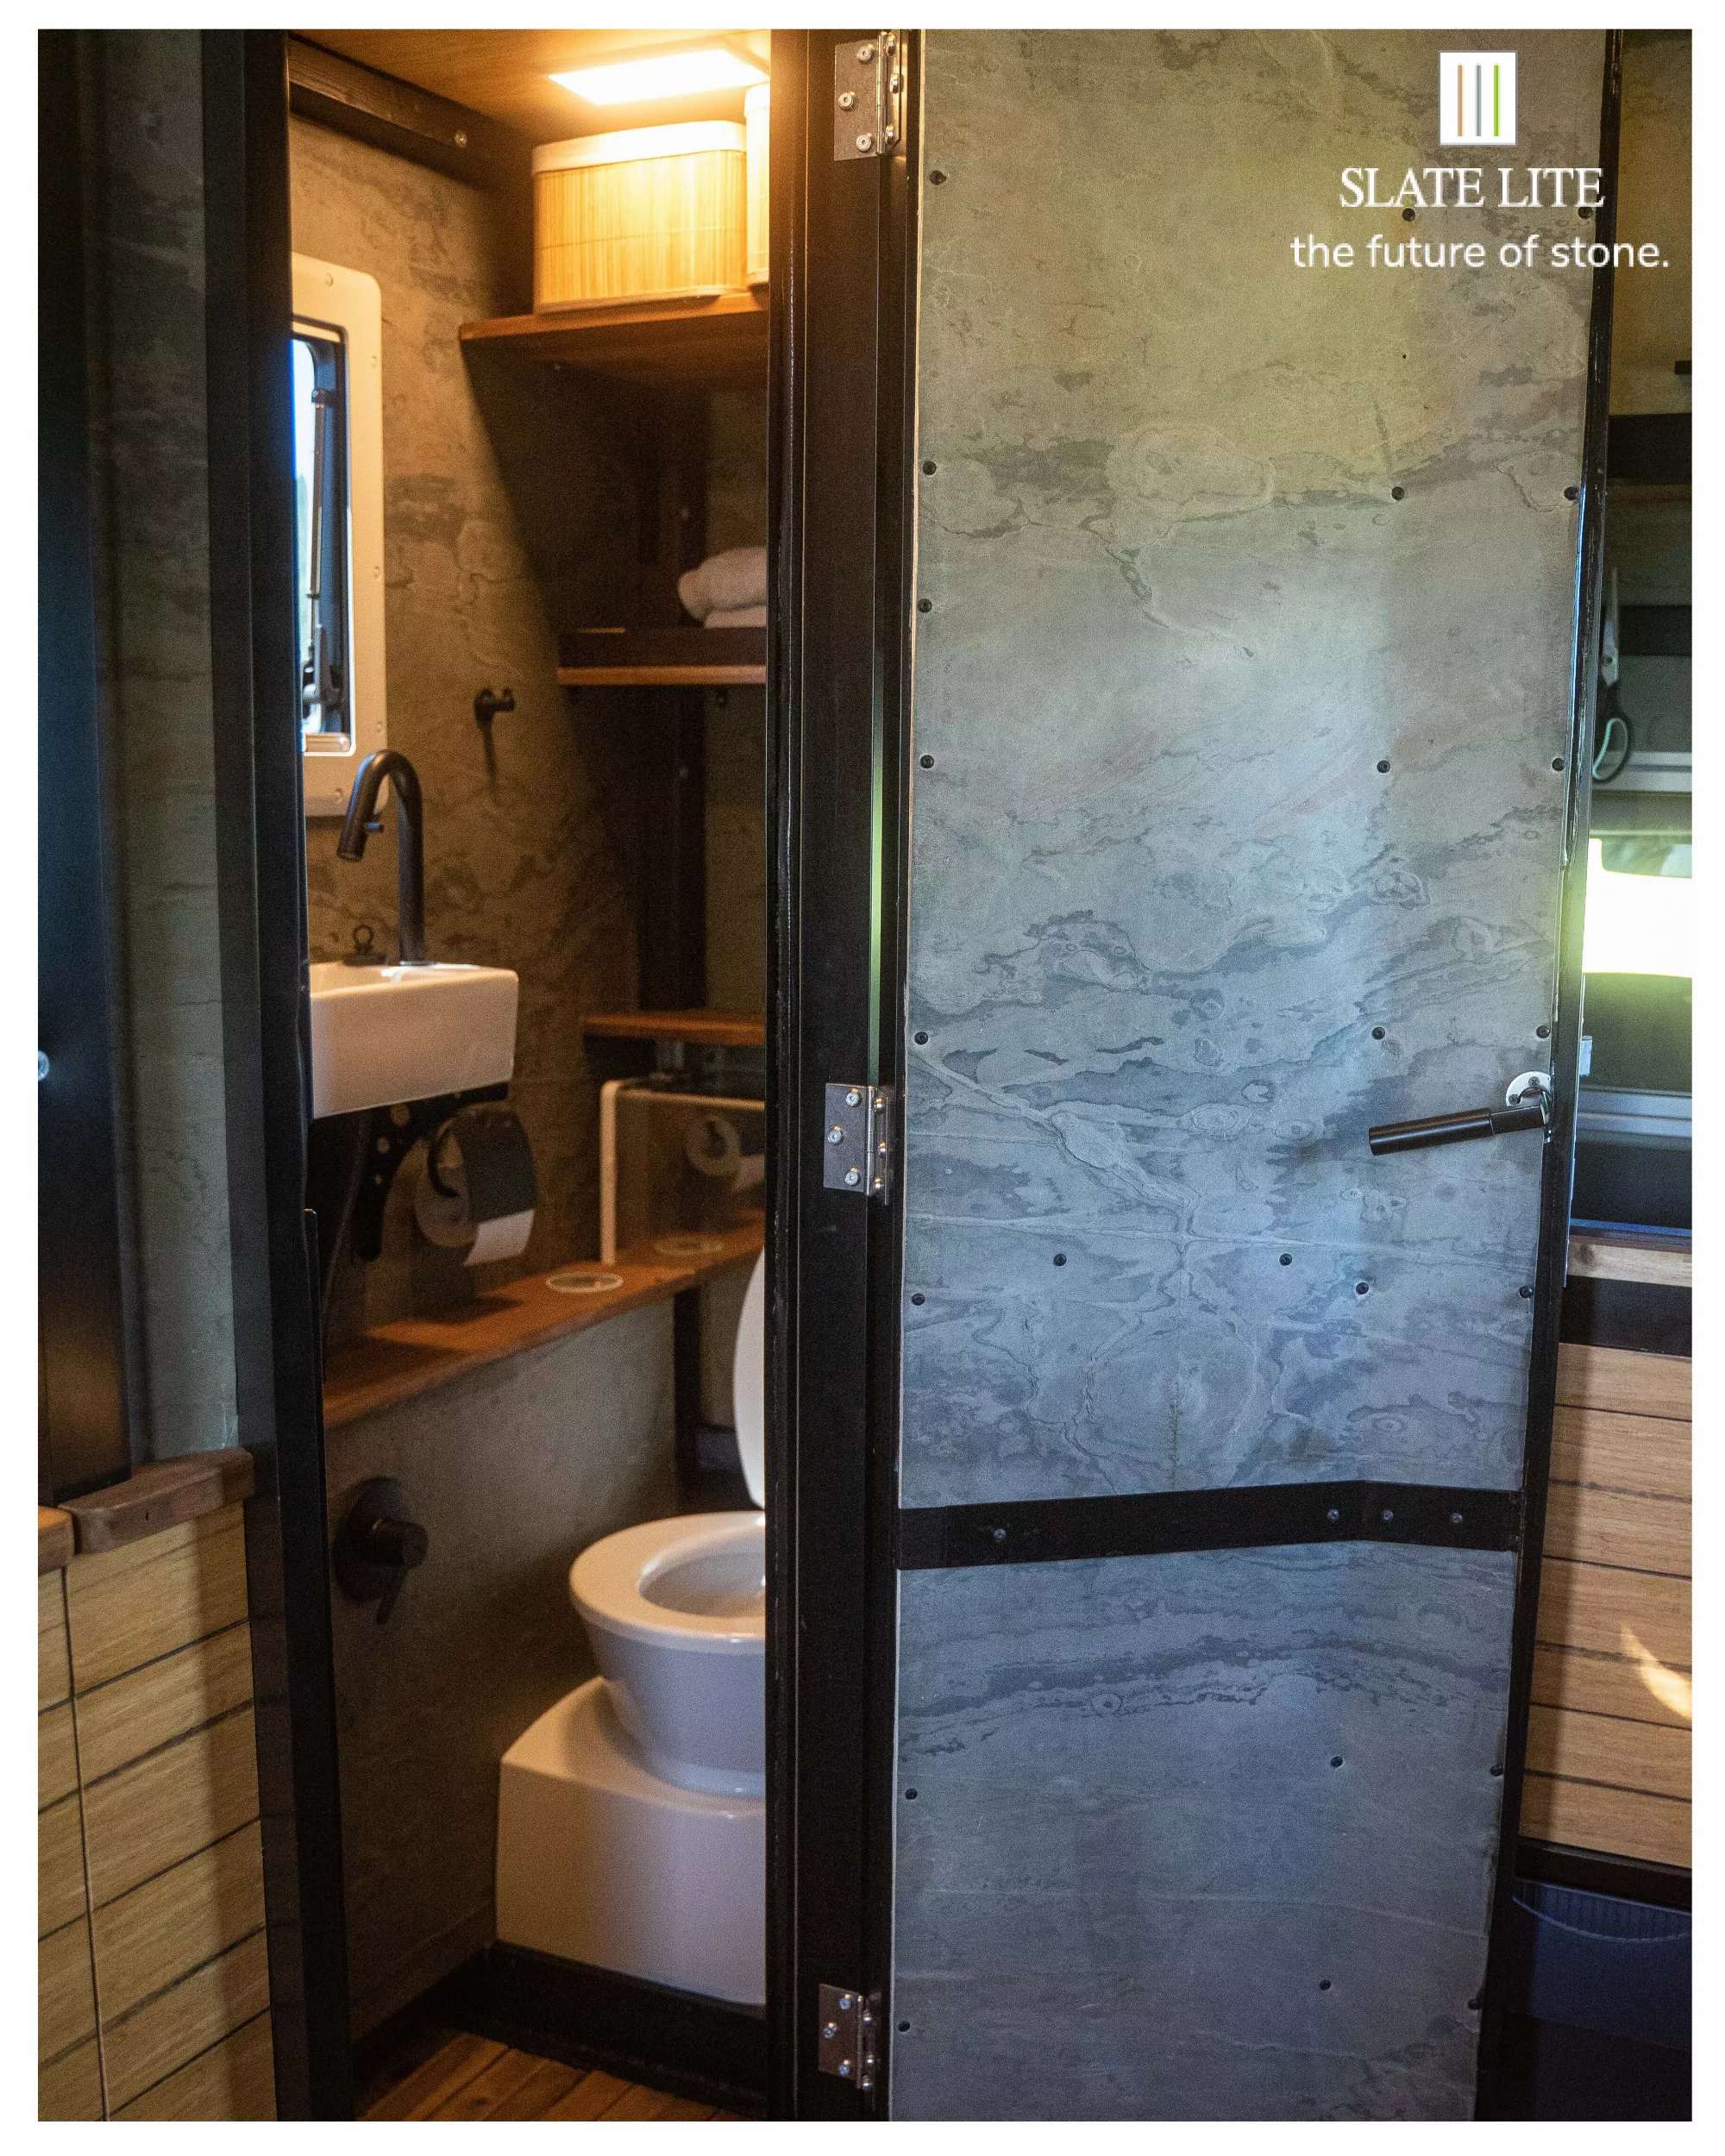 The bathroom also convinces with Slate-Lite